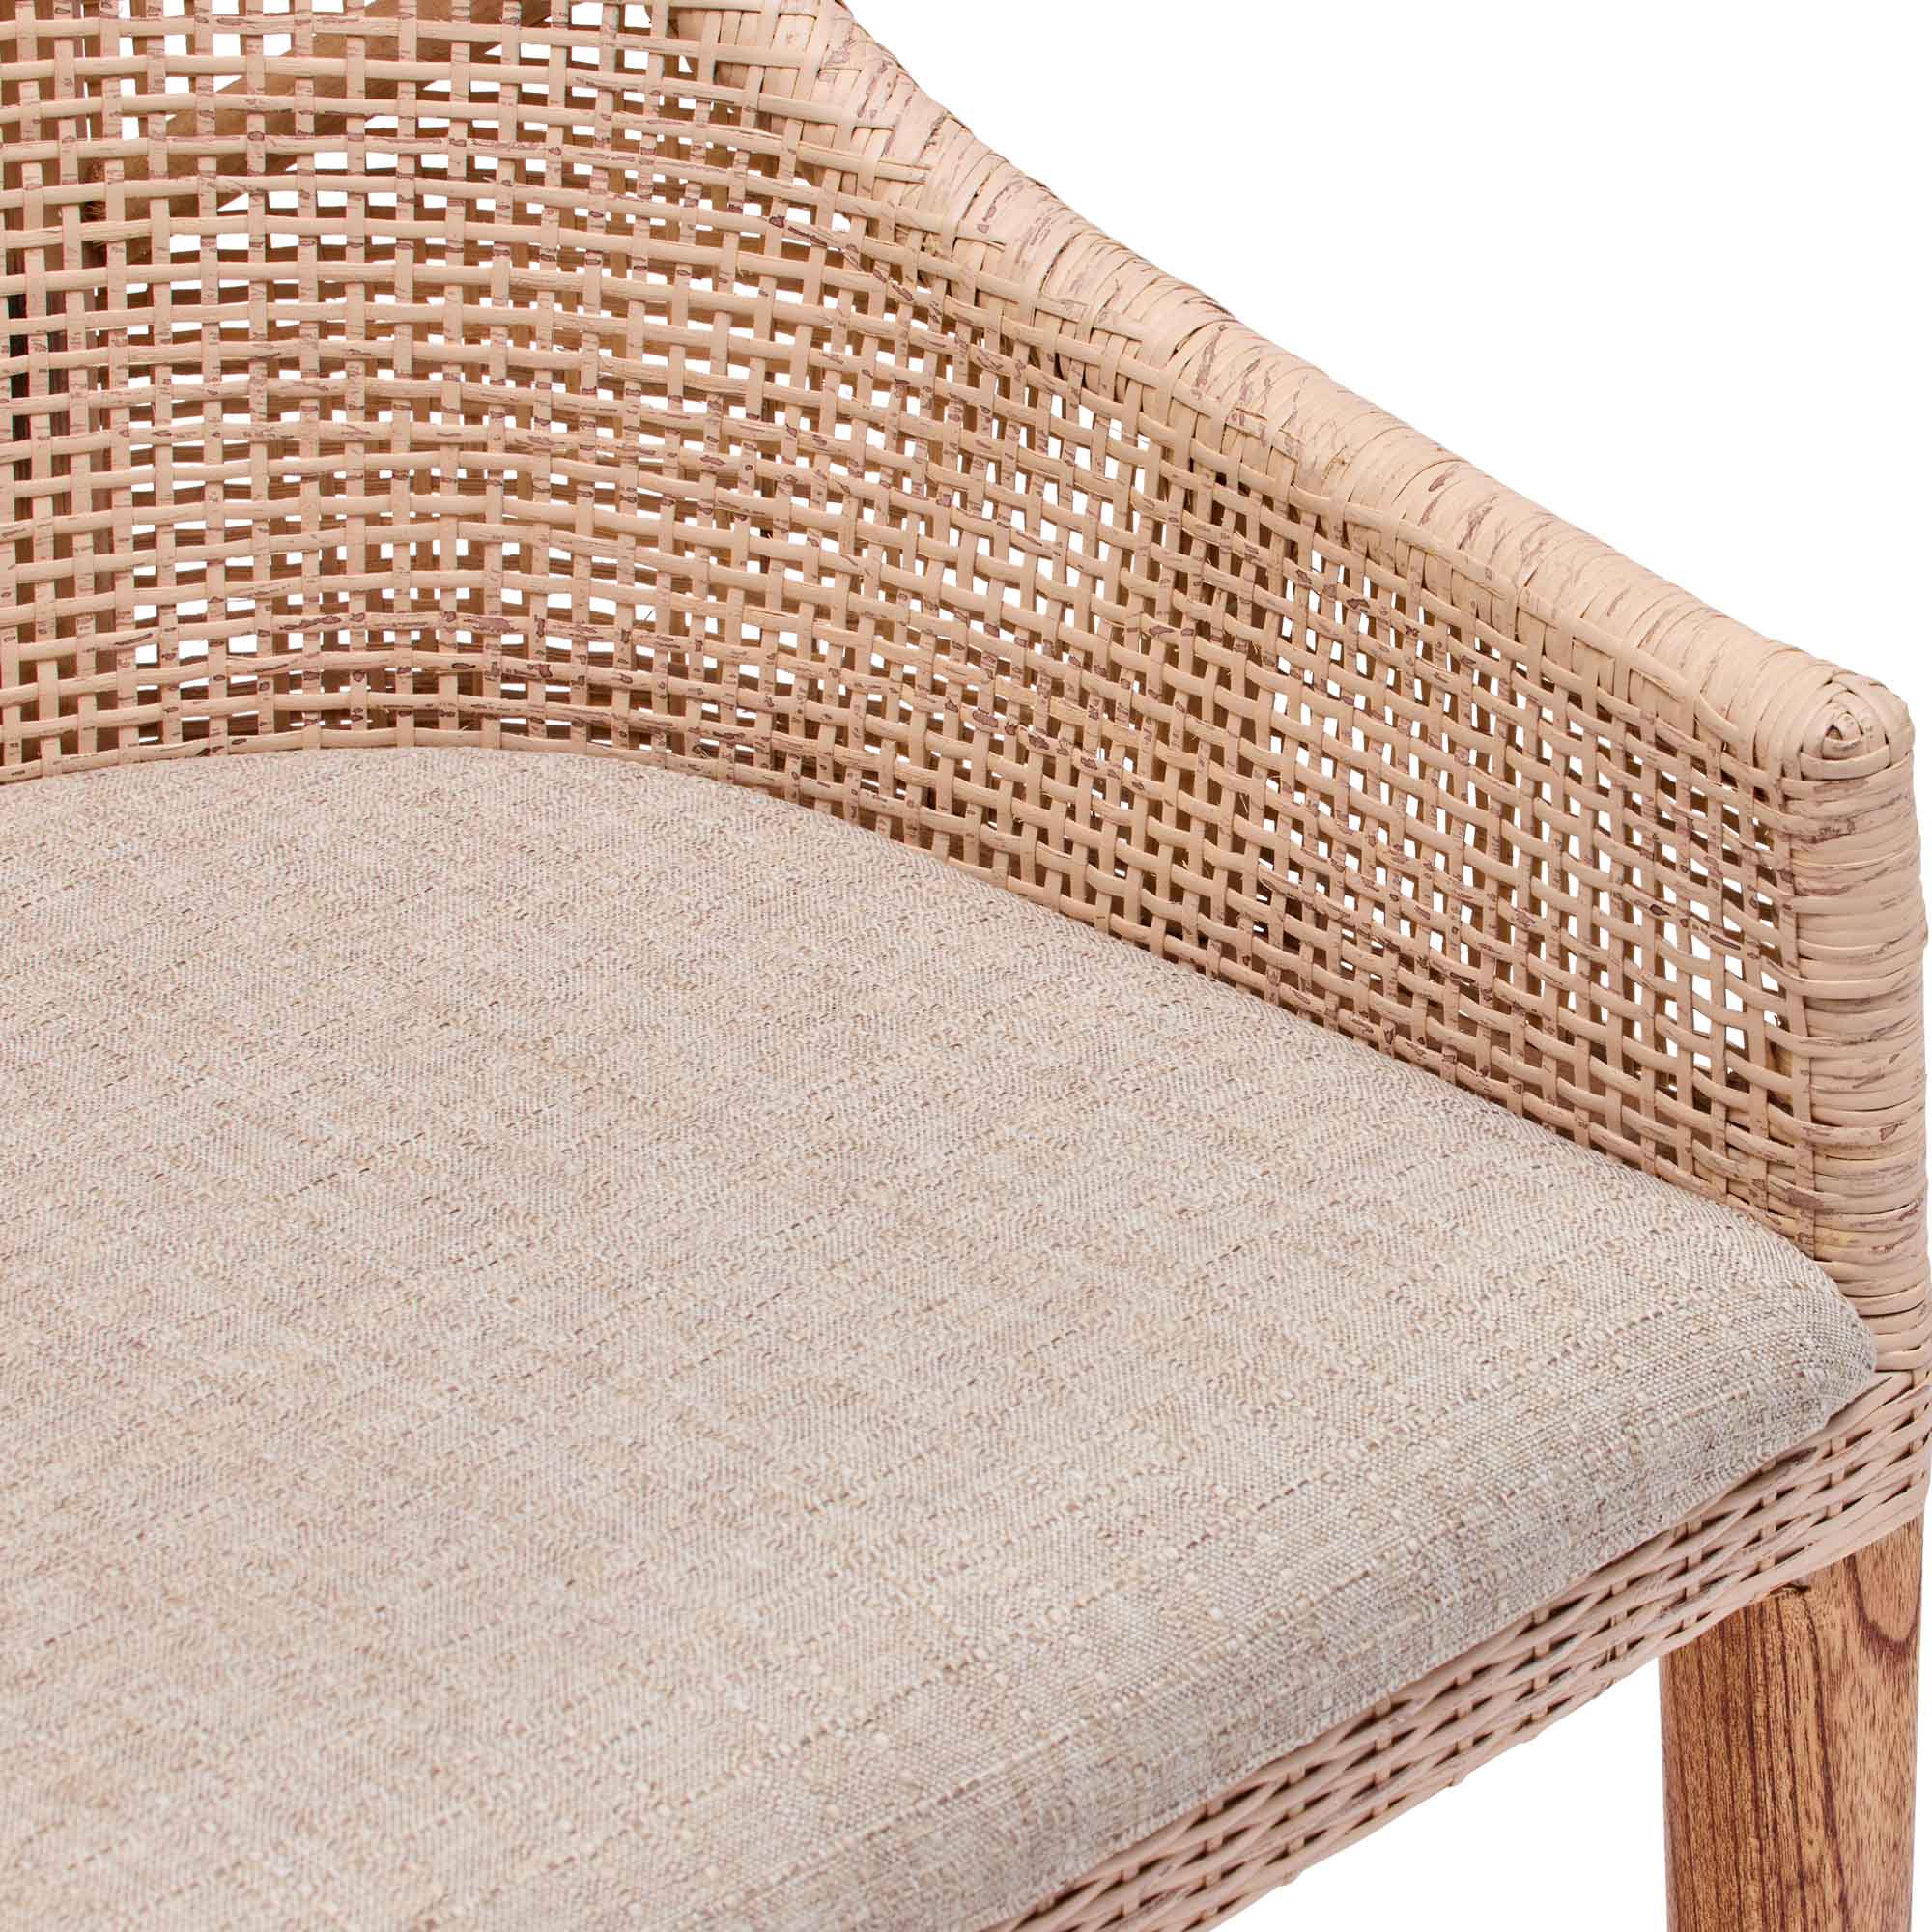 Remi Dining Chair Natural